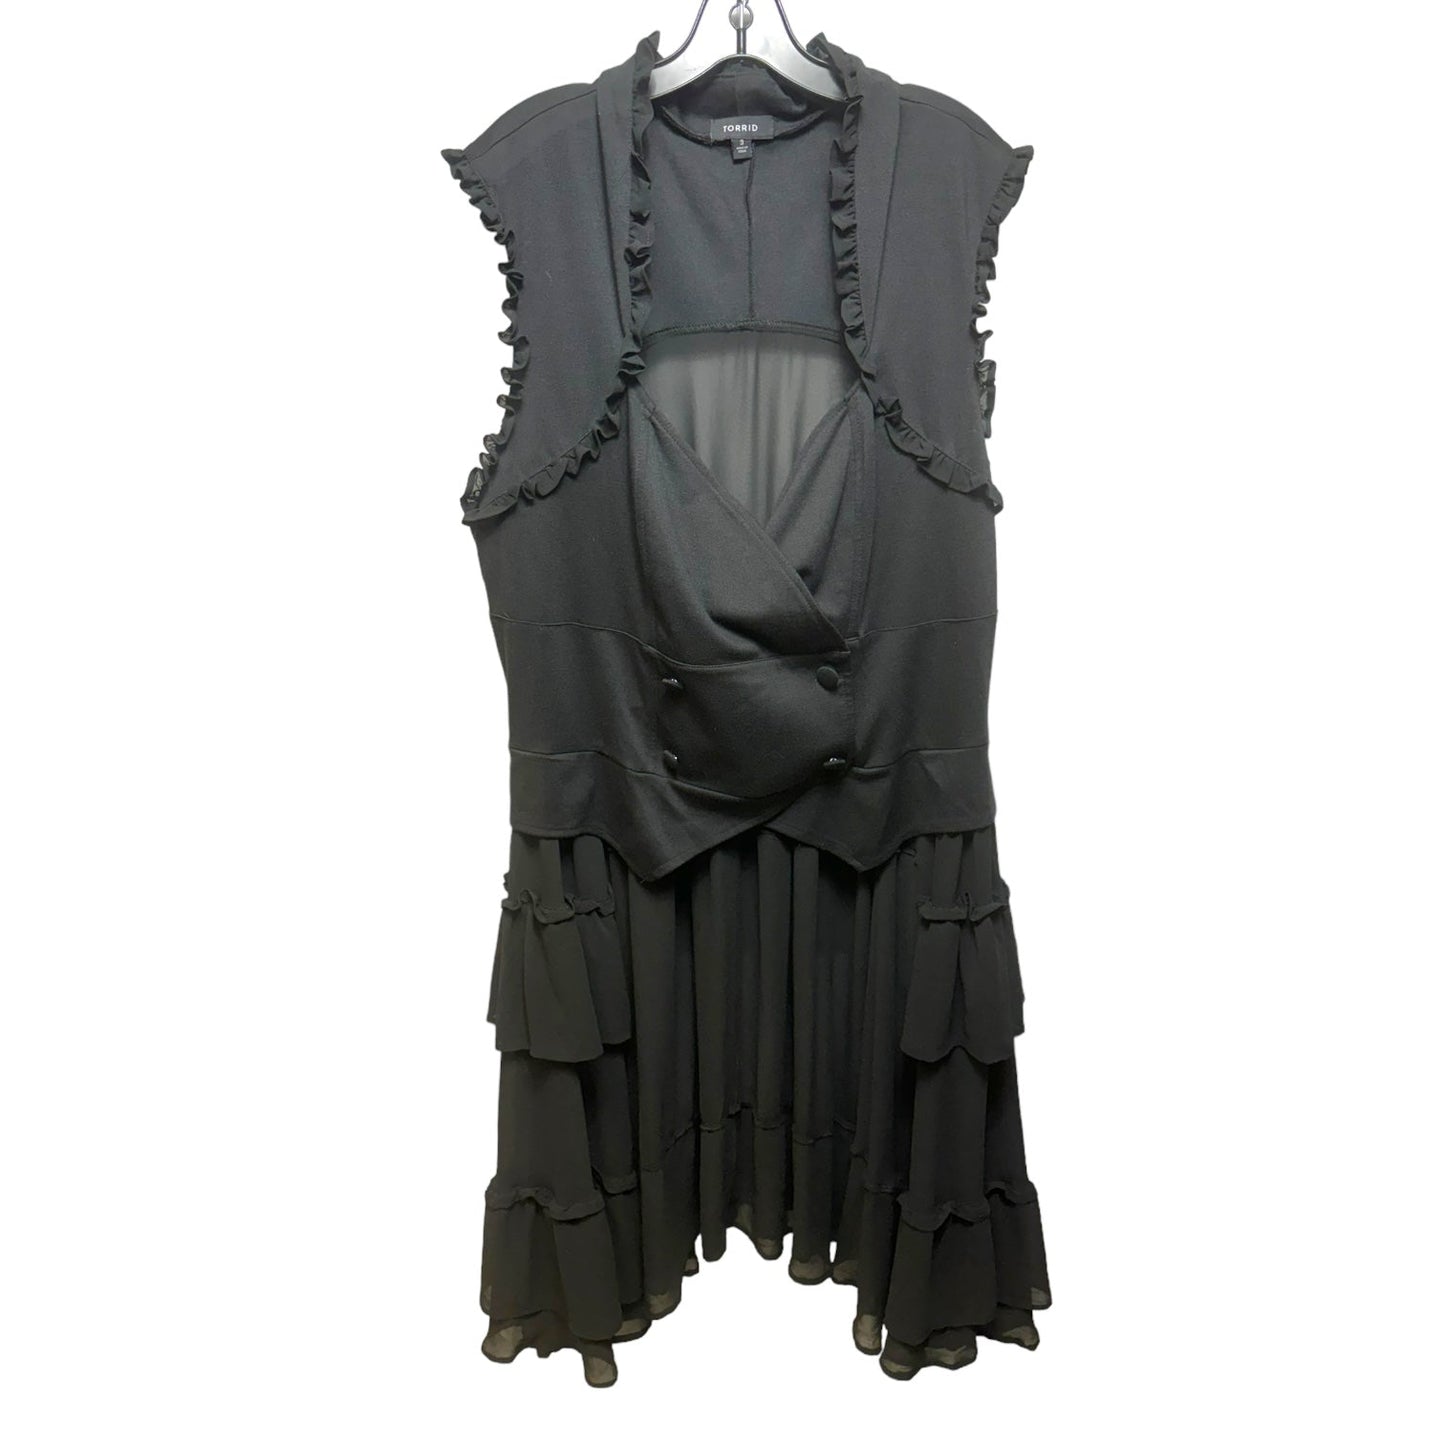 Tiered Ruffle Corseted Tuxedo Vest By Torrid  Size: 3x